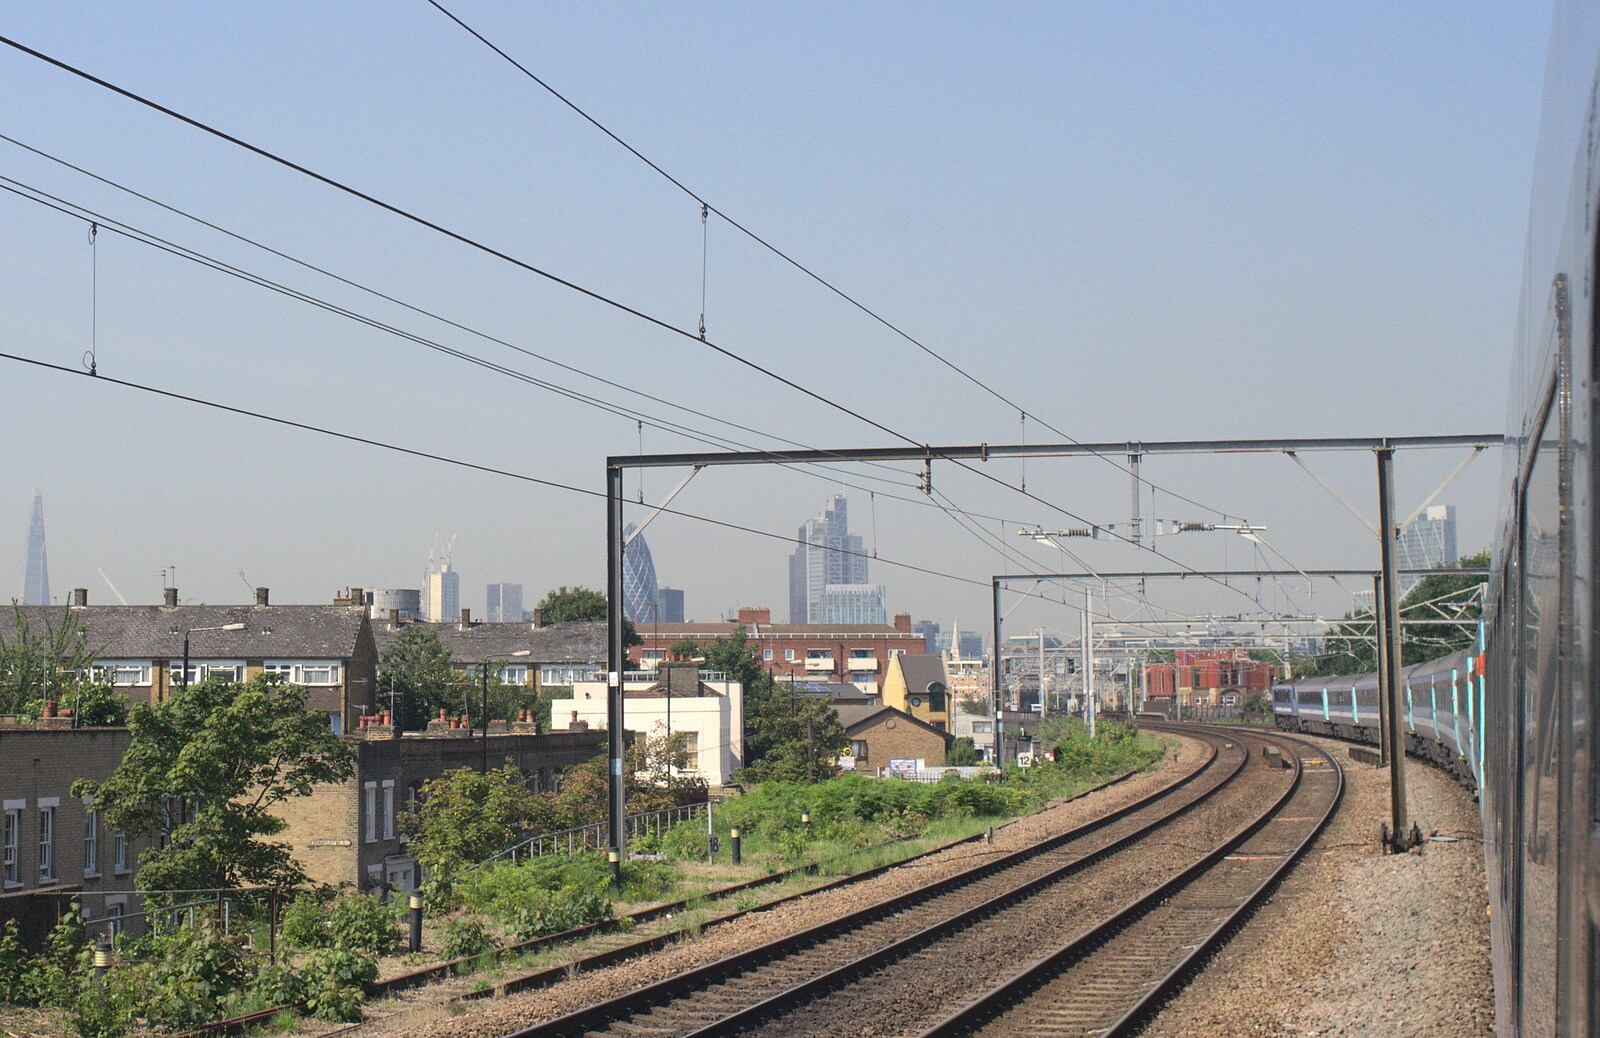 On the rails near Bethnal Green from TouchType Office Life, Linton House, Union Street, Southwark - 25th July 2012